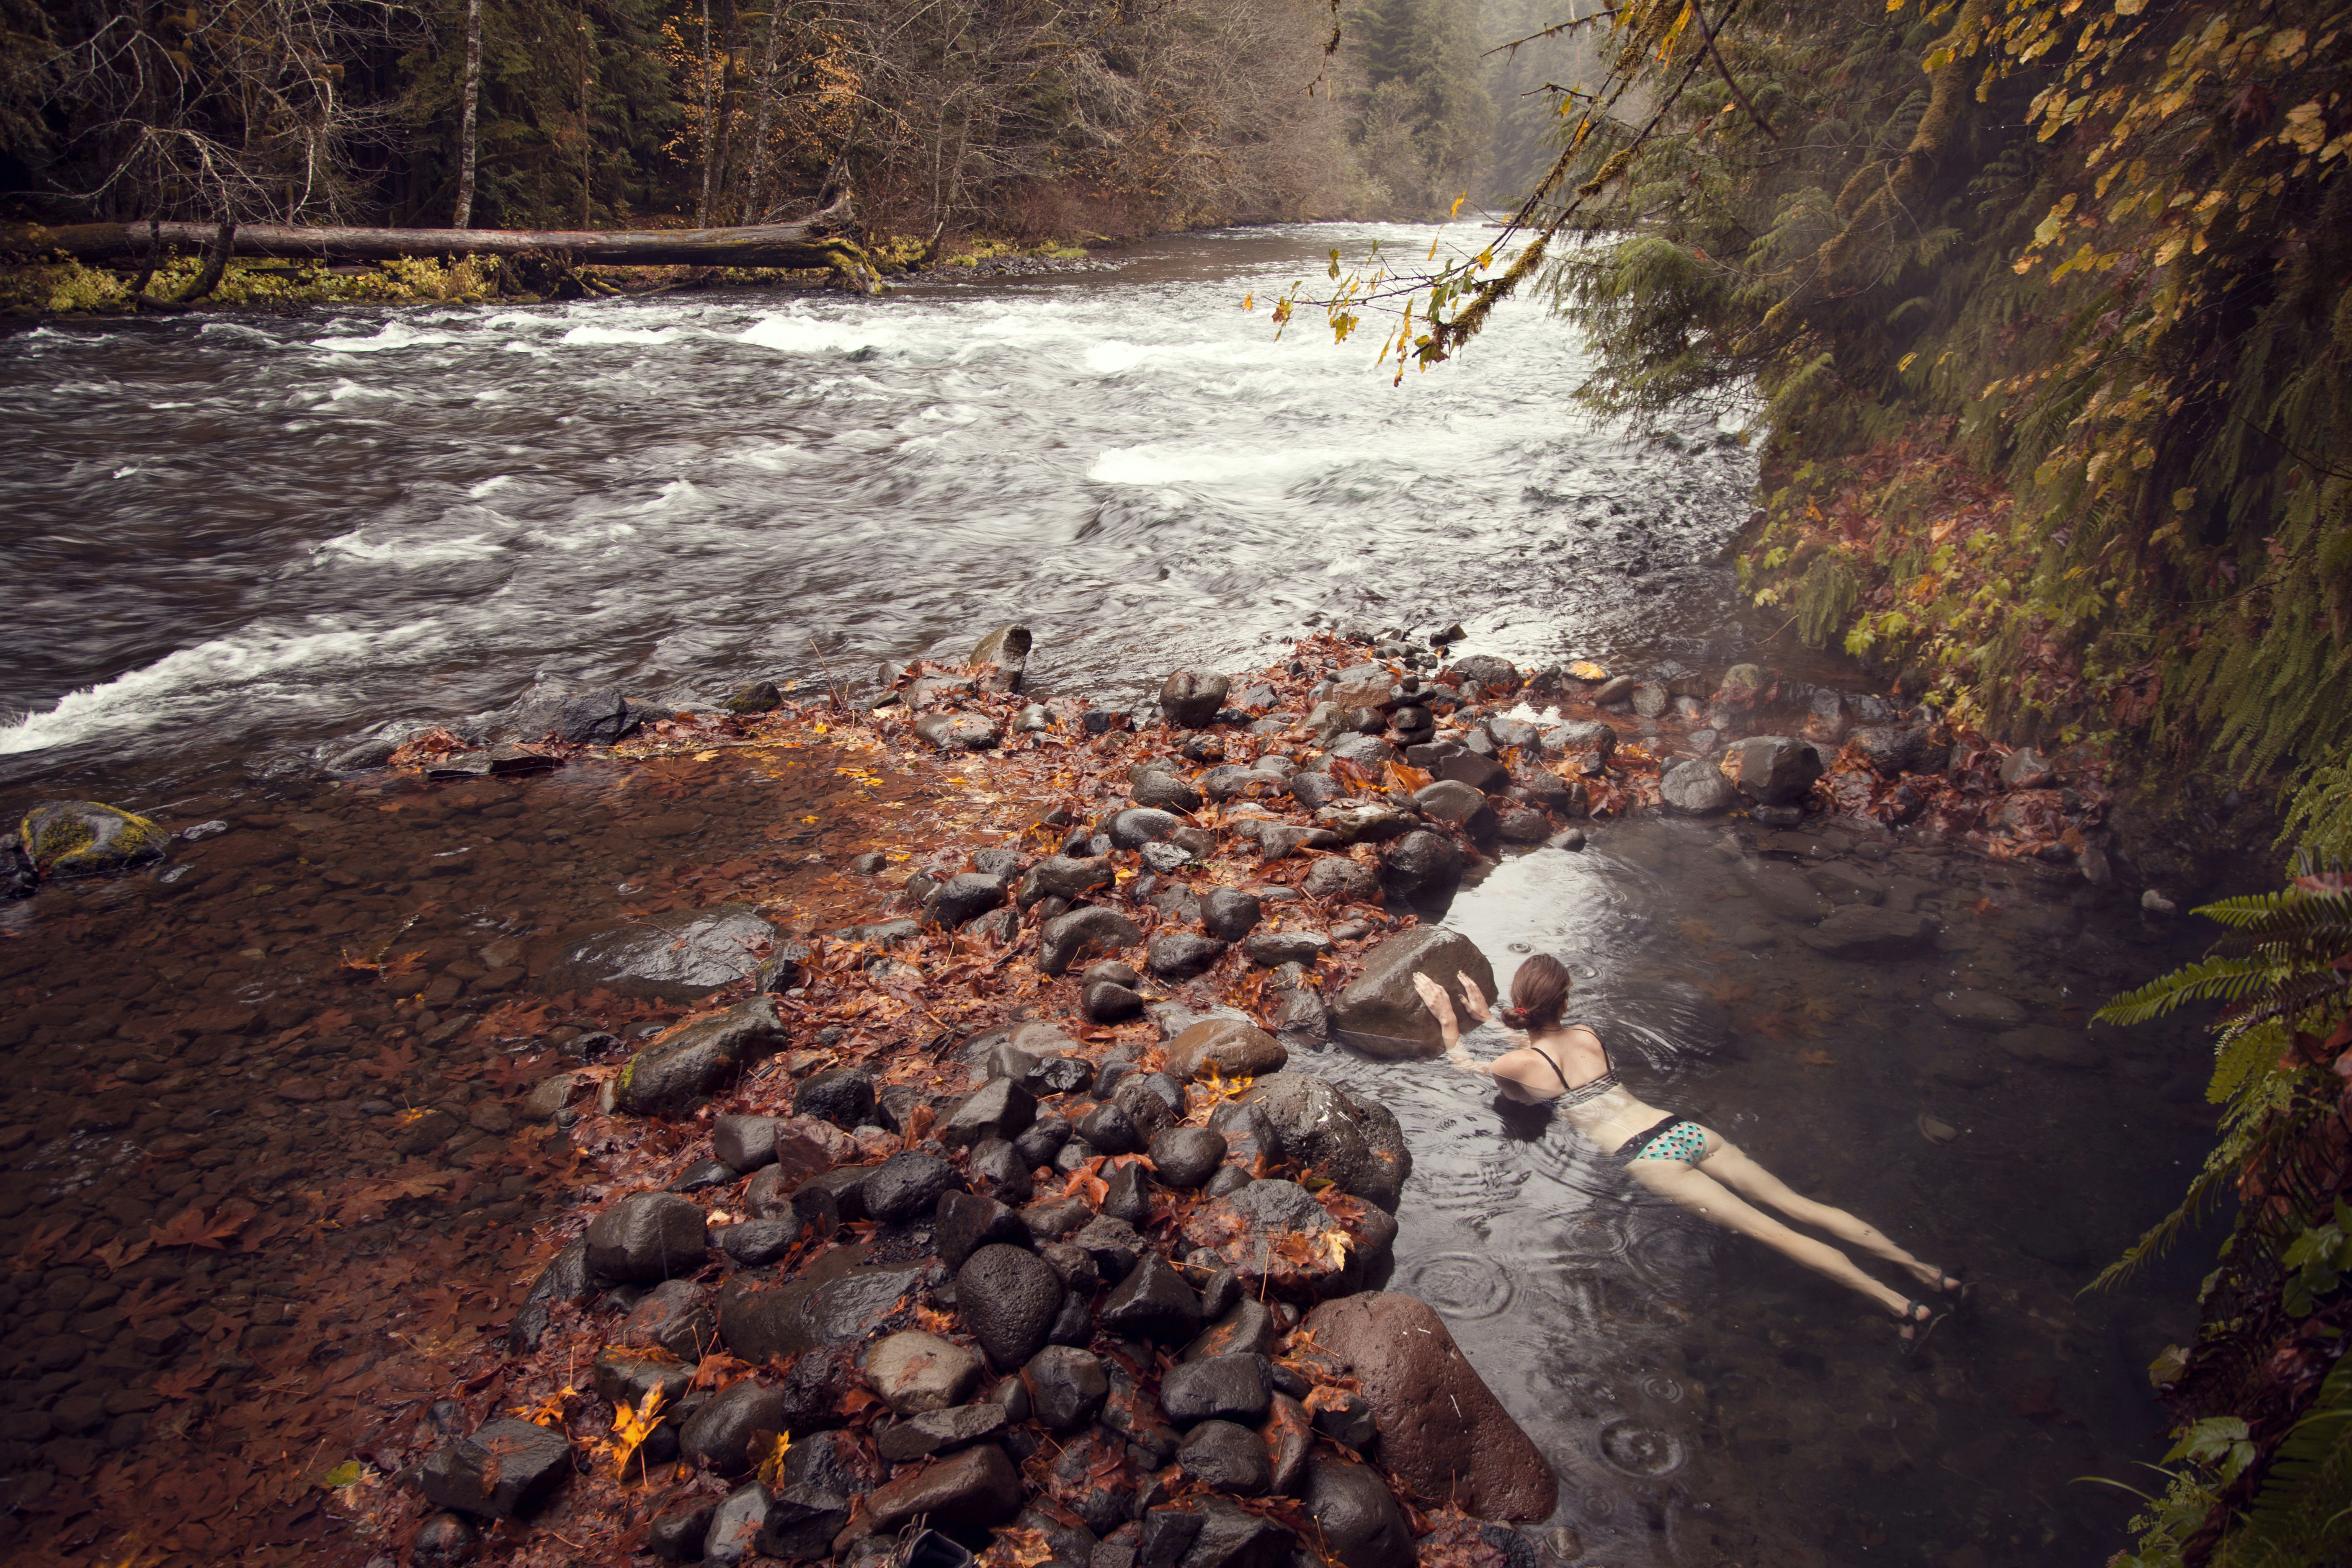 A young, thin woman in a green and white polka dotted bikini with a black waistband lays on her stomach in an Oregon hot spring overlooking a river just a few yards away. All around the spring are river rocks and leaves in autumnal colors, contrasting with the grey tint of the water except for whitecaps on the river rapids.